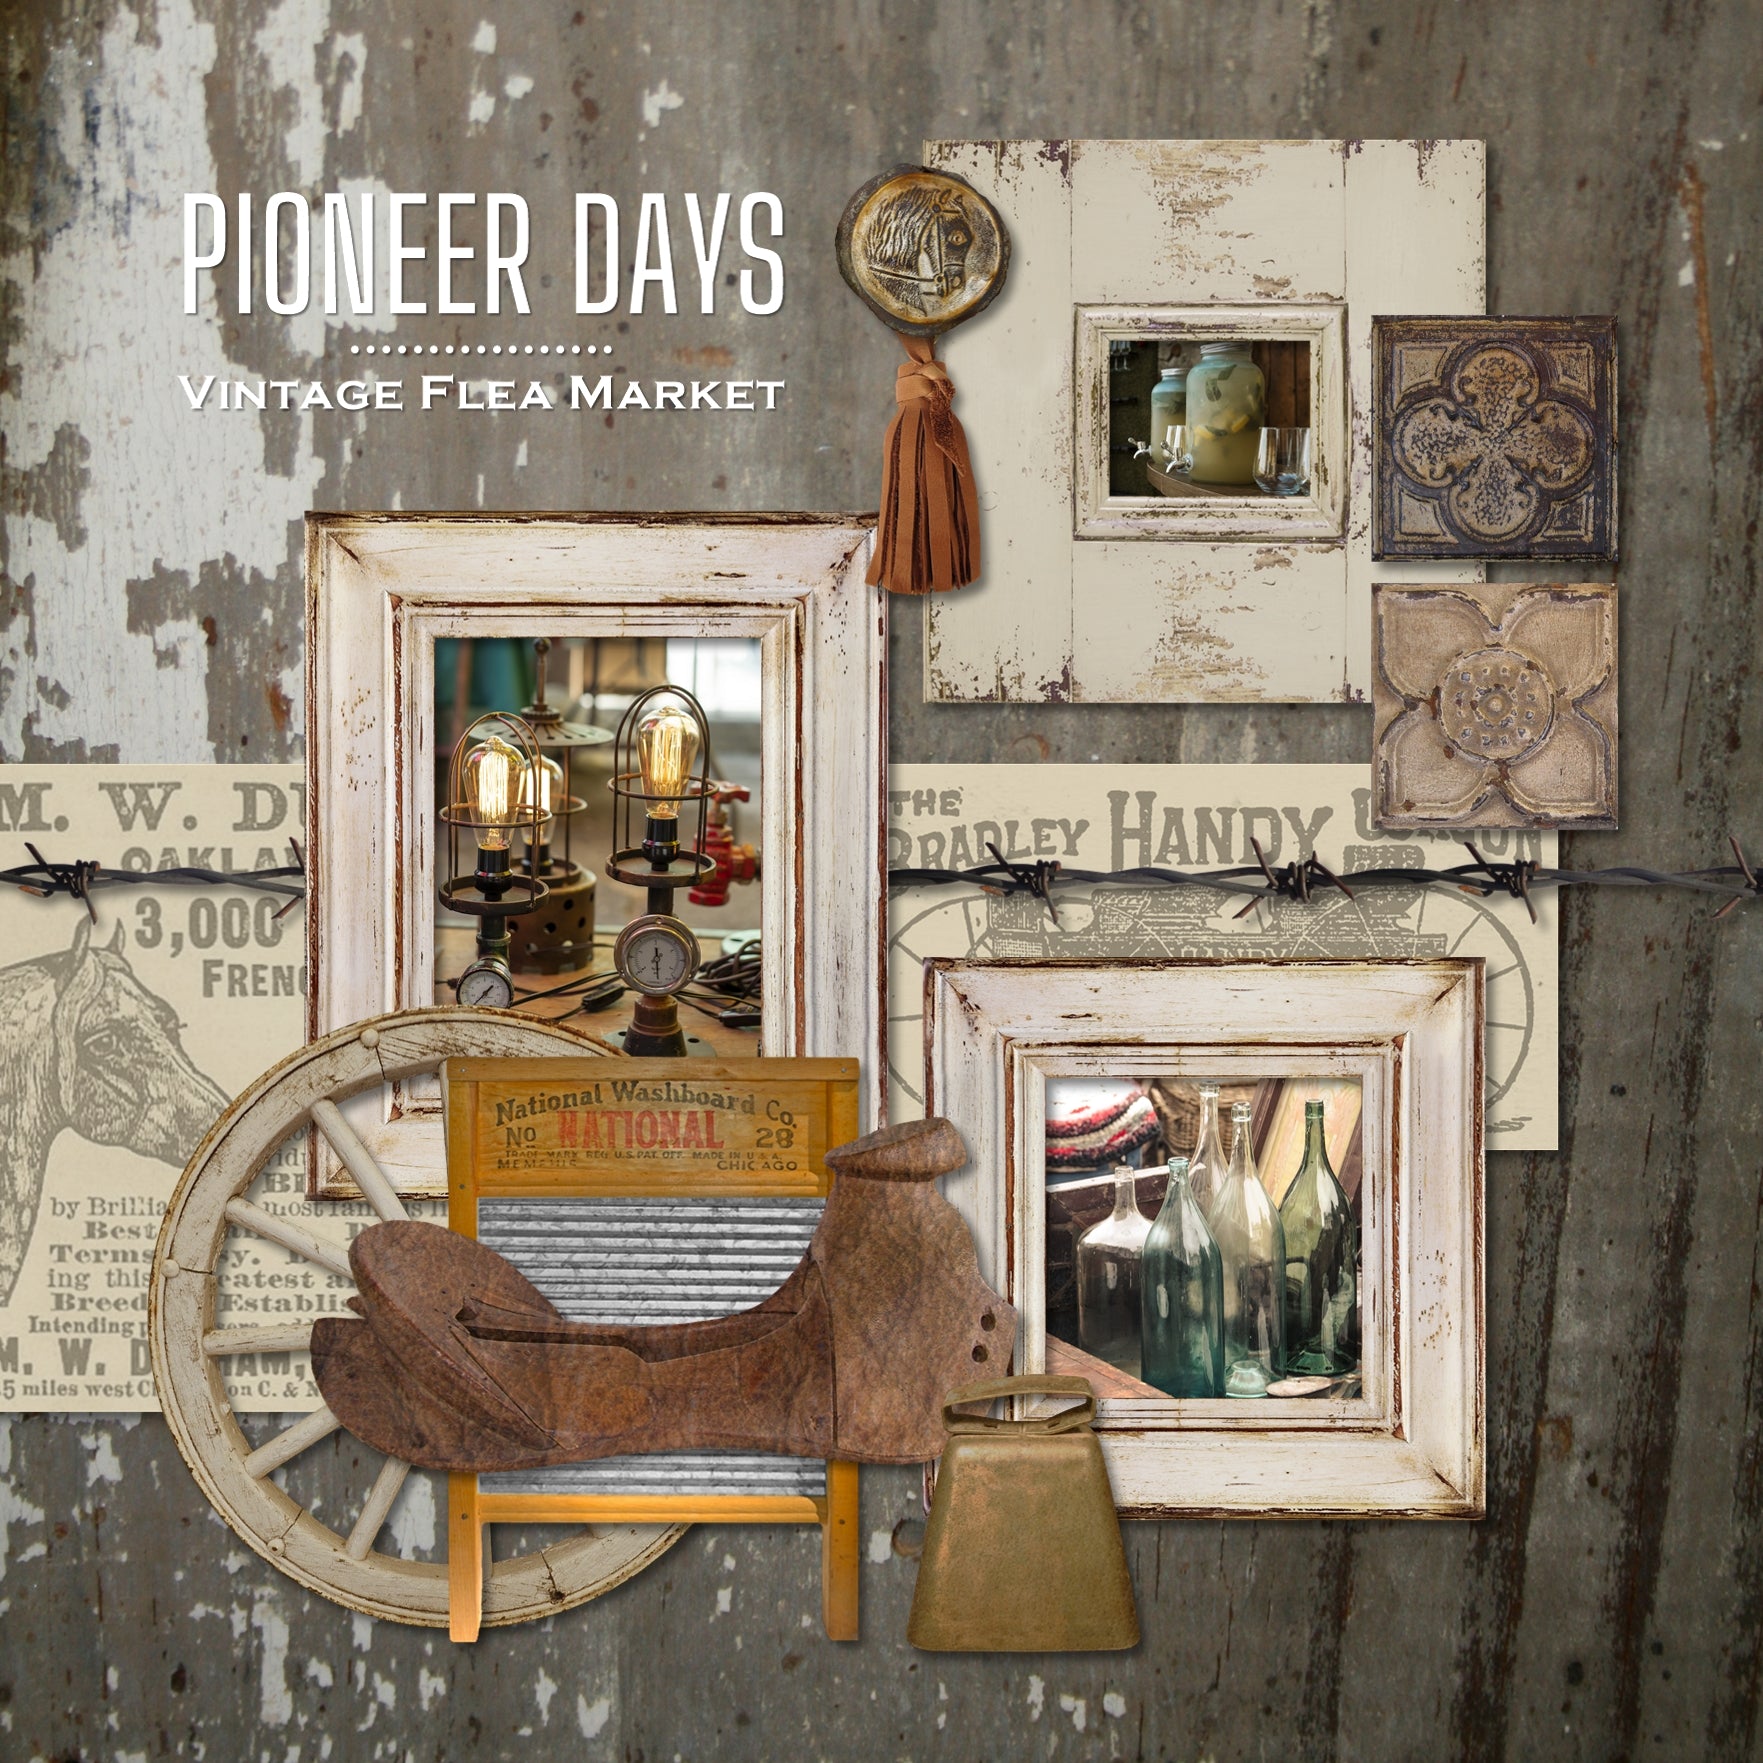 The most popular of all the Lucky Girl Creative digital art collections with its antique Western theme, the American Wild West Bundle is the perfect collection for all your rodeo and cowboy scrapbook pages, western websites, and other projects. The antique color palette features white-washed elements, rustic wood tones, metal pieces, and natural leather textures. The bundled kit combines 3 of the most popular Western themed collections to bring you the best value possible.